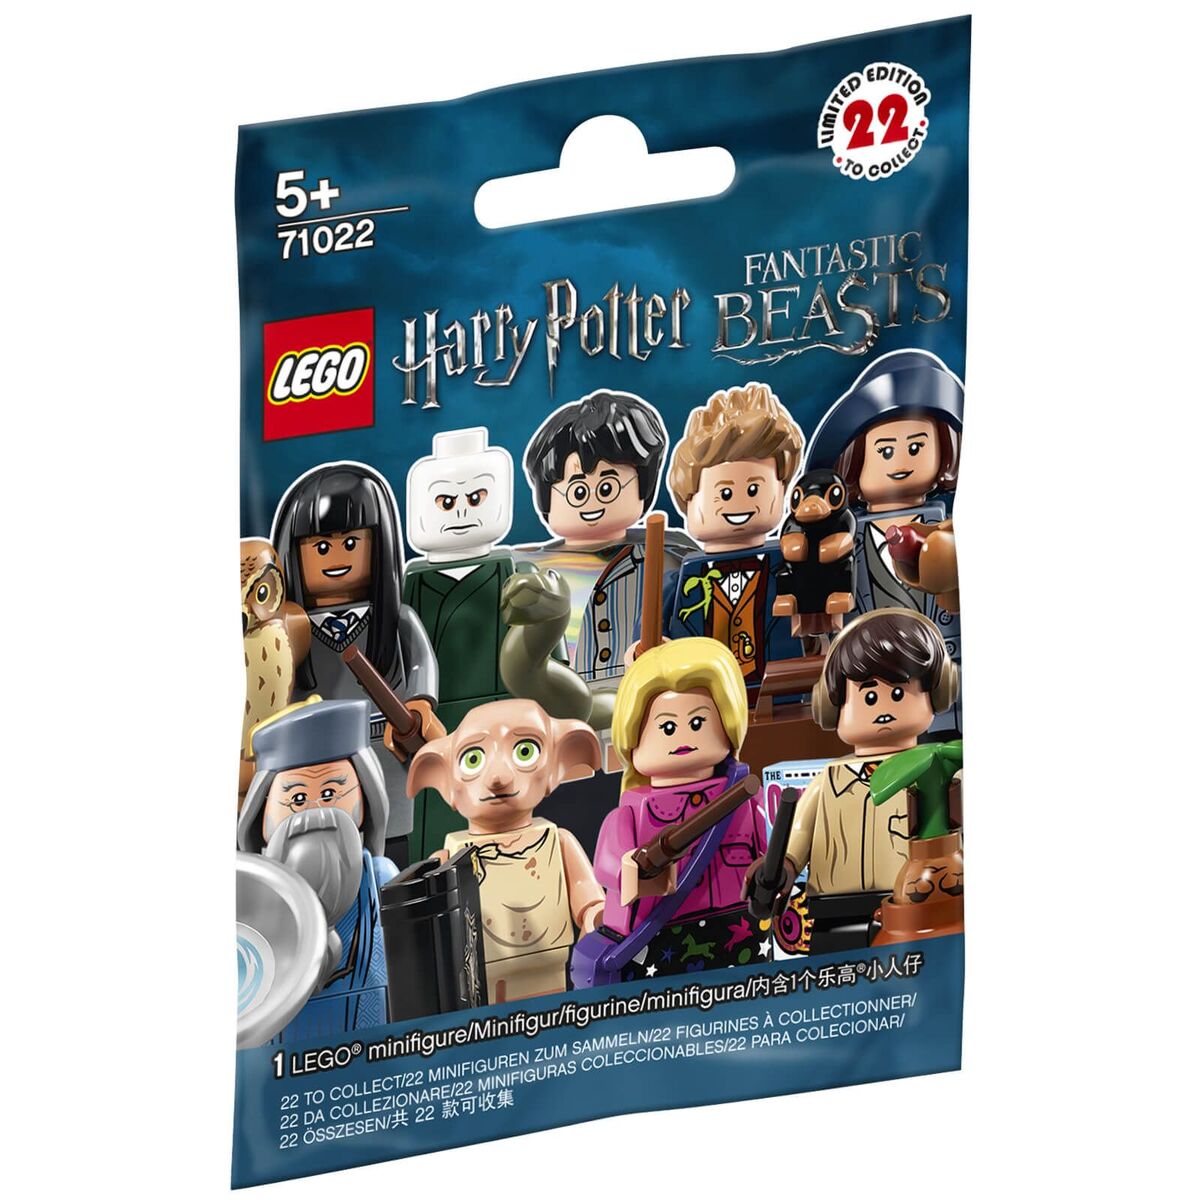 LEGO Harry Potter Magical Surprises LEGO Book with Neville Longbottom  Minifigure - The Minifigure Store - Authorised LEGO Retailer - Buy Now Pay  Later 0% Interest